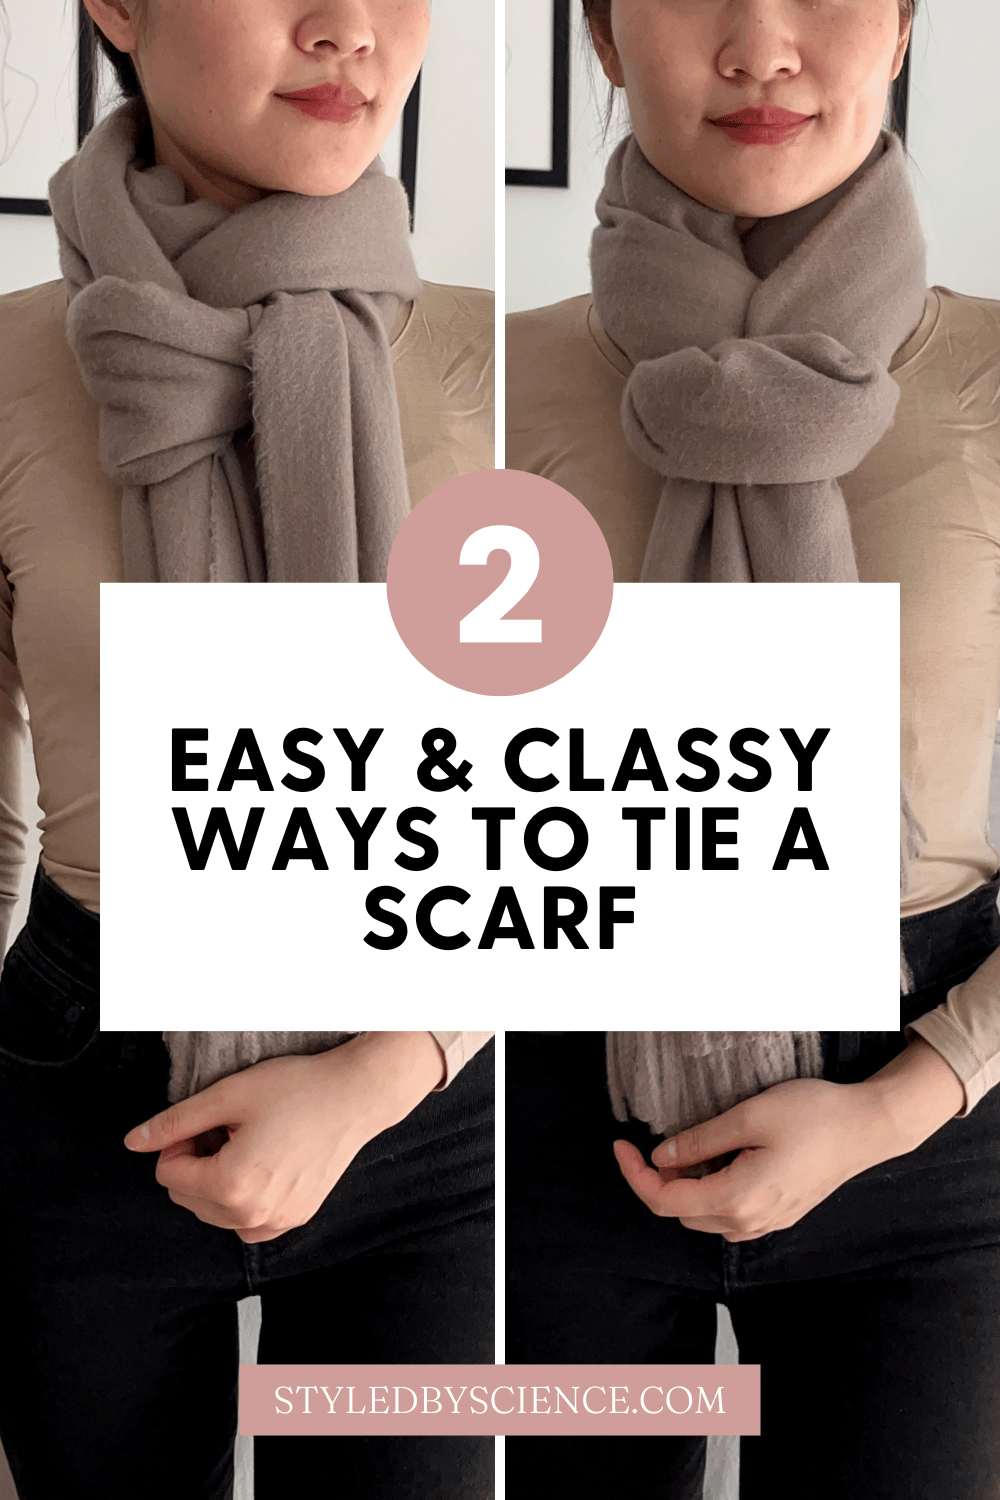 The 5 Best Types of Winter Scarf for Women to Wear in Winter - The